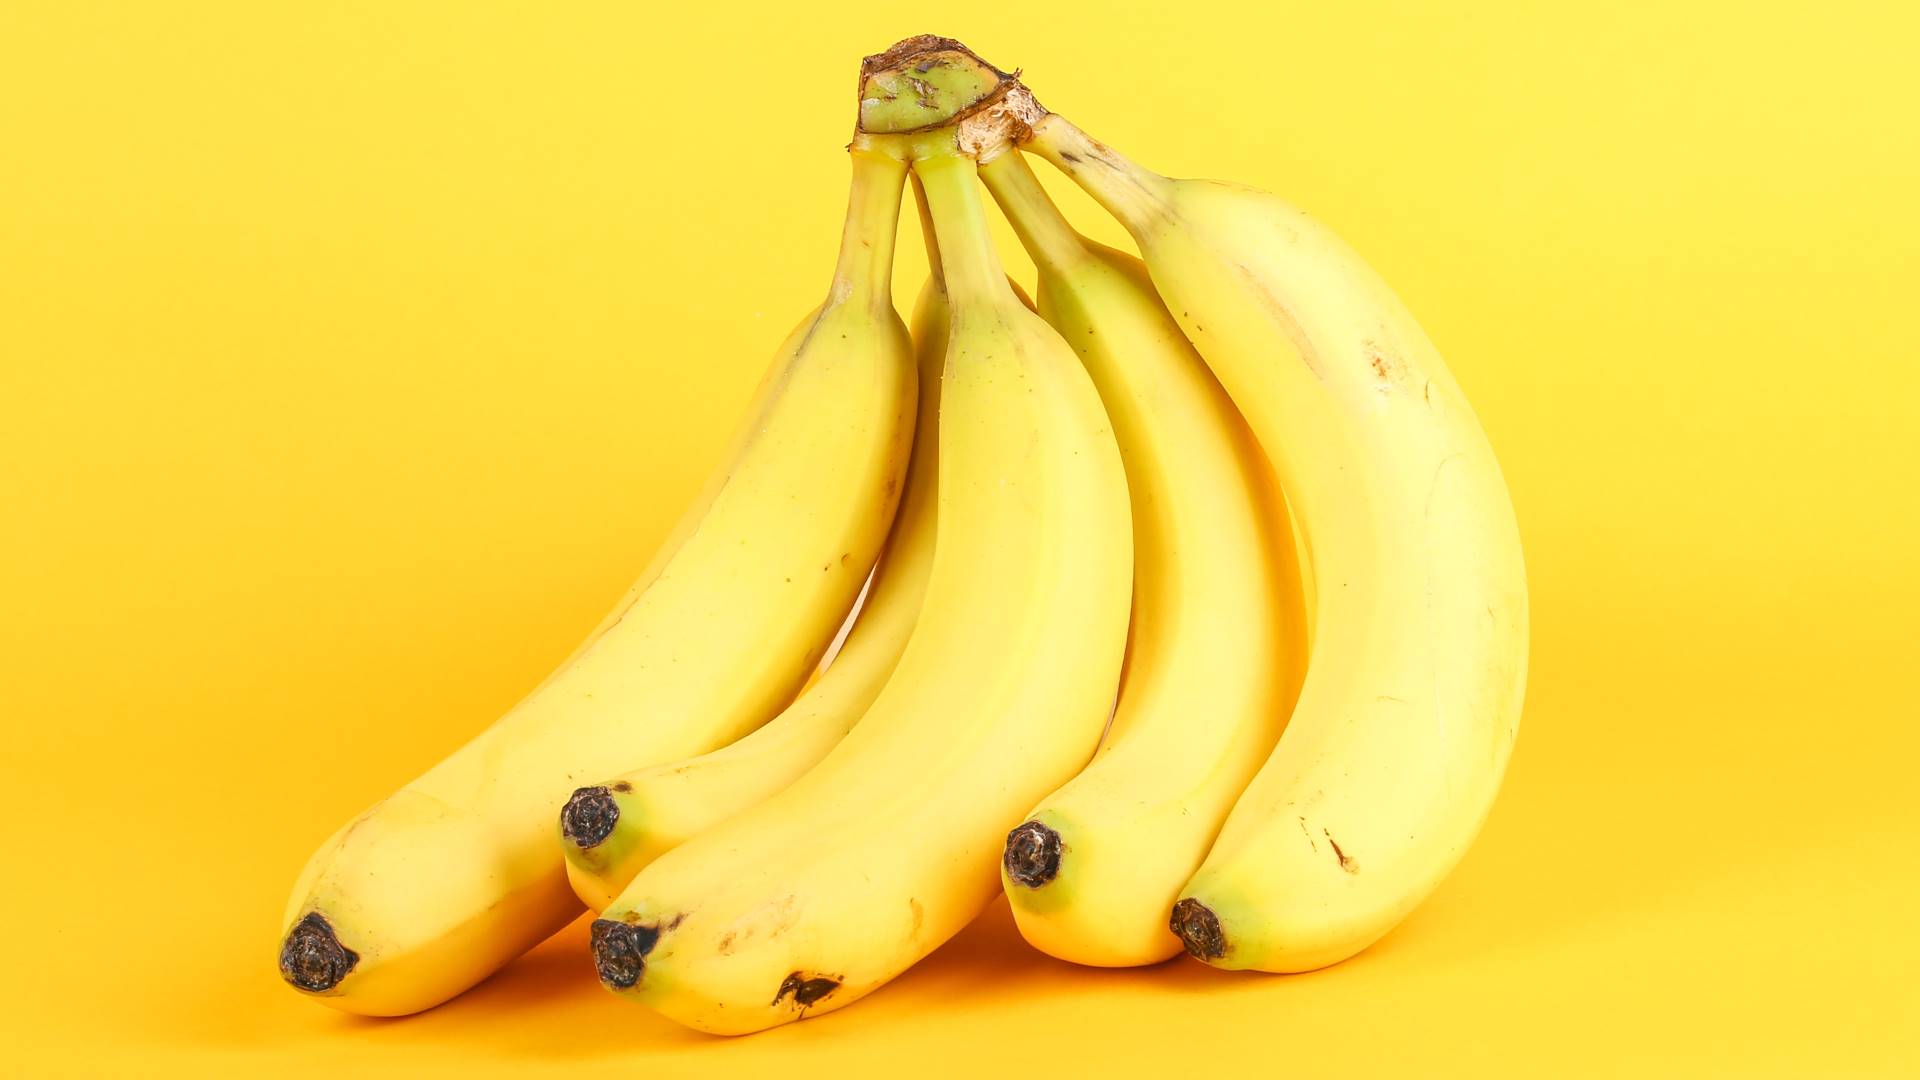 Most of the calories in a banana come from carbs.